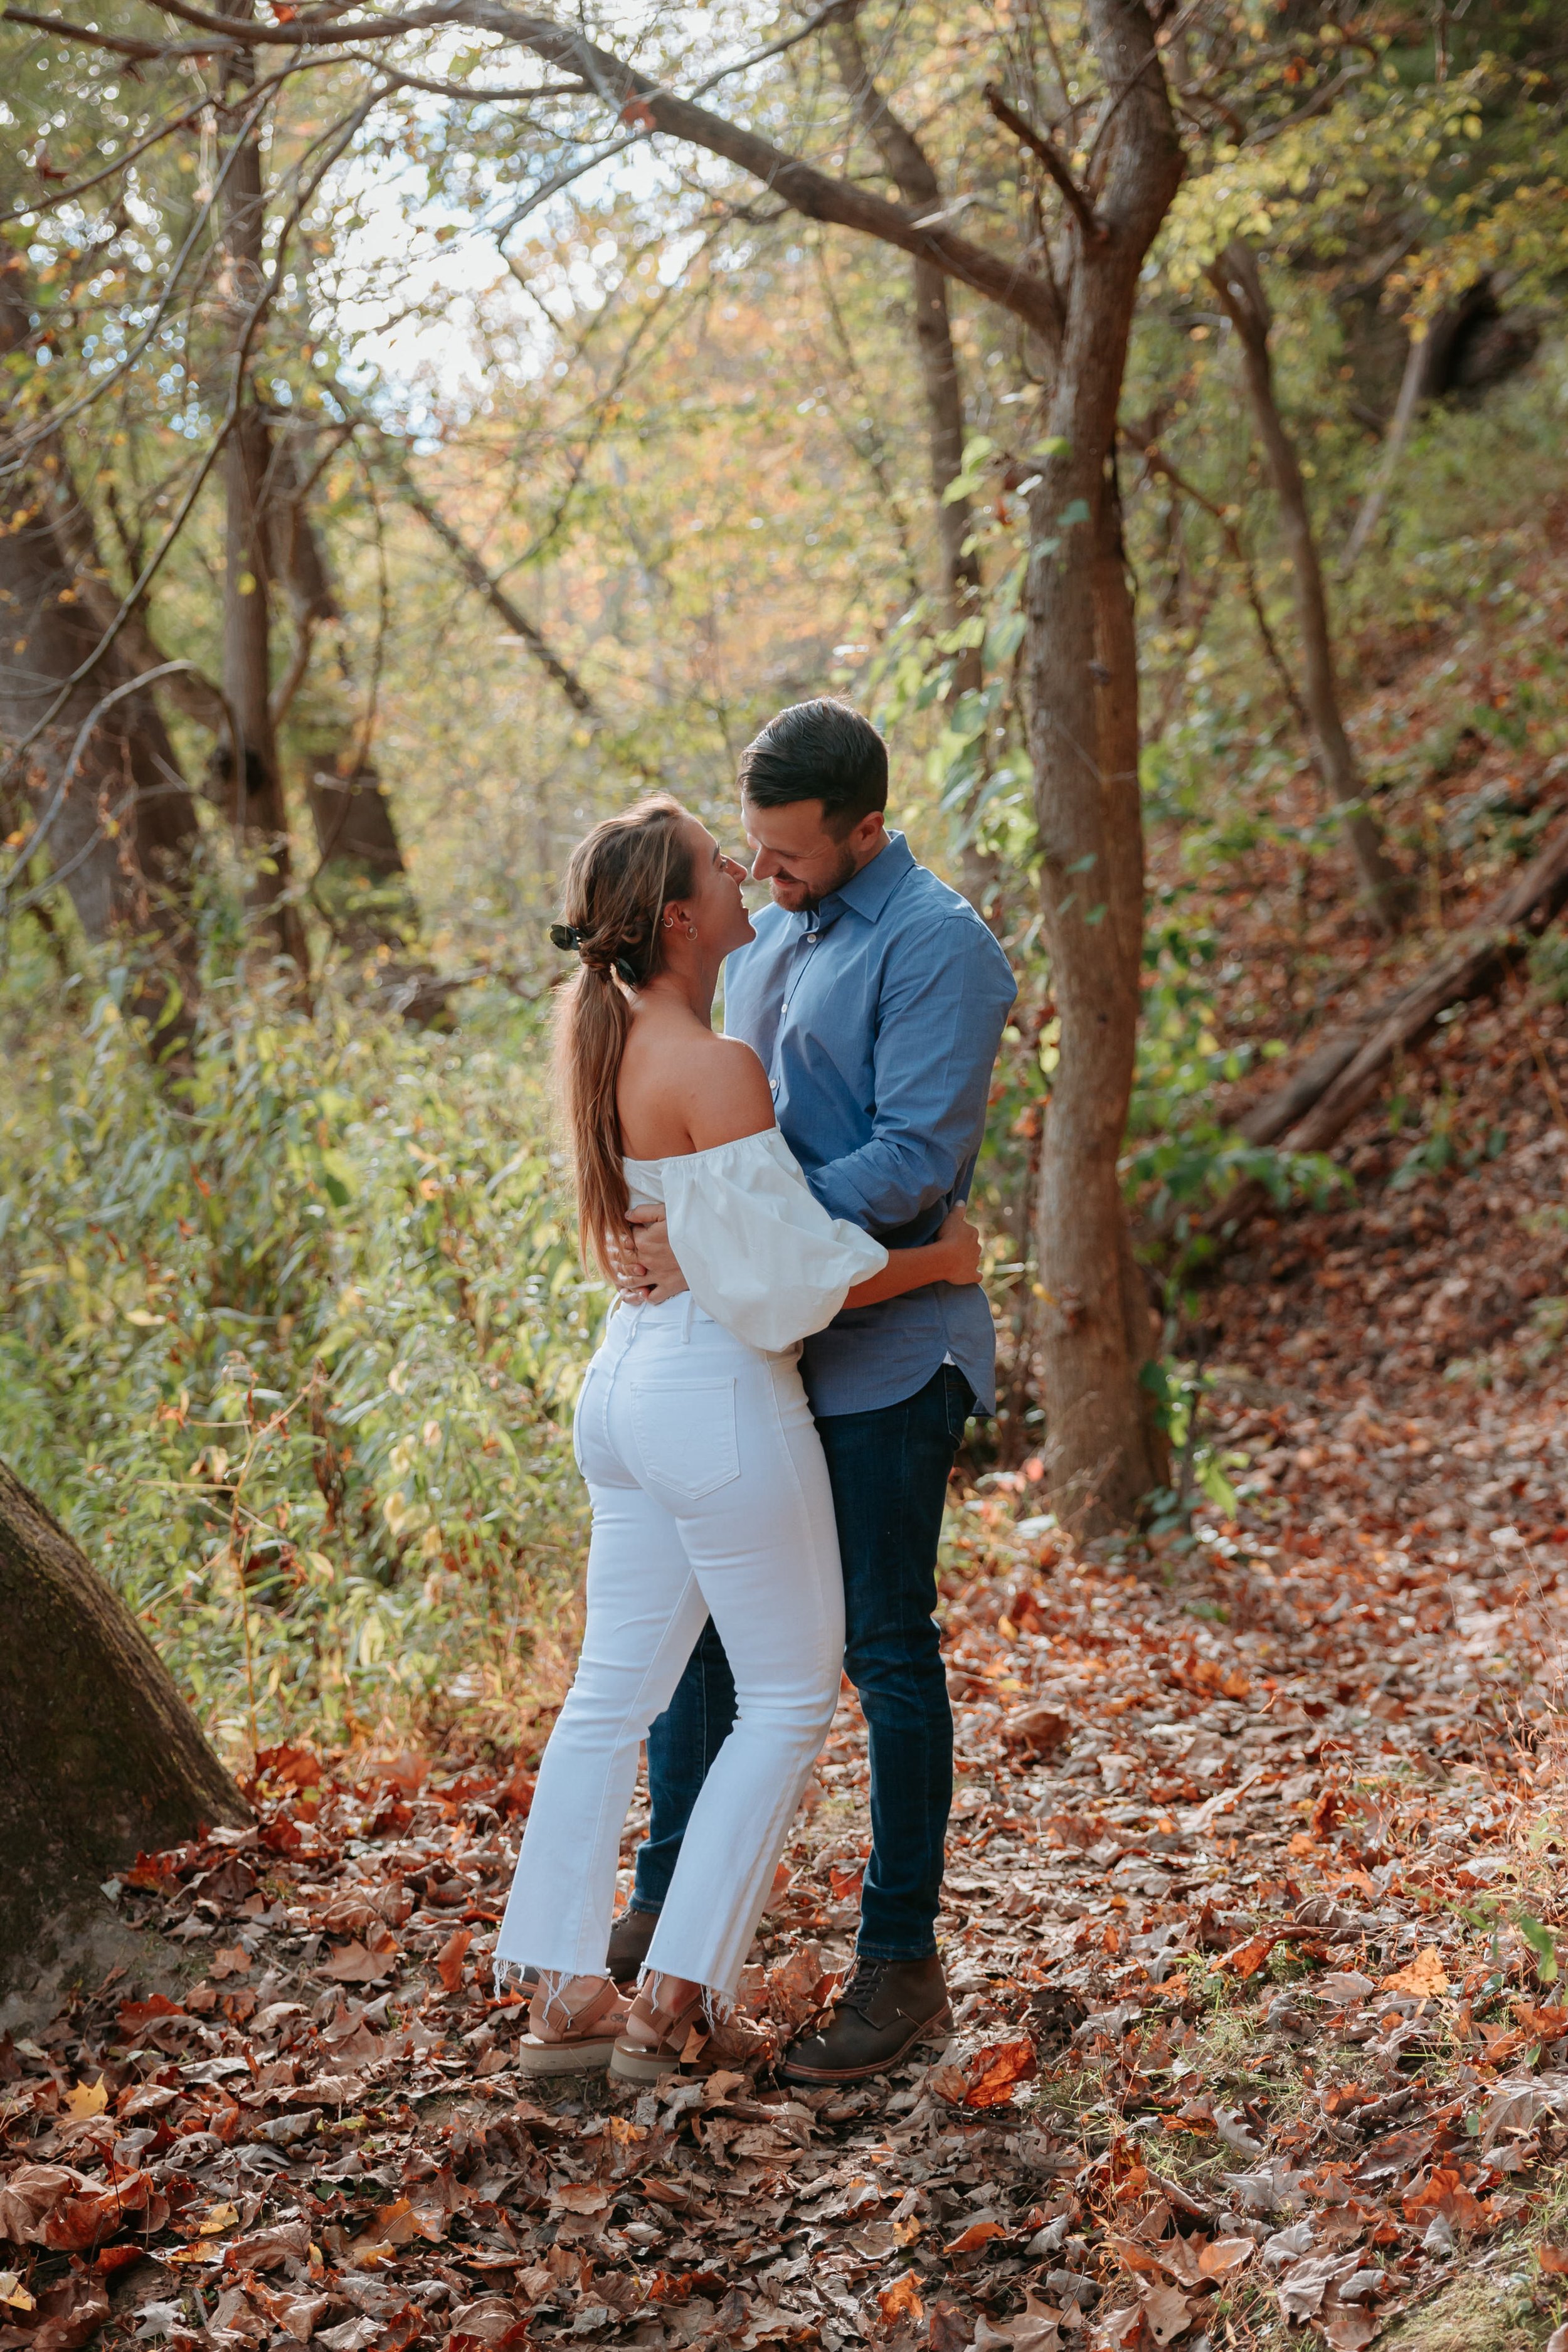 Man and woman embrace in forest.